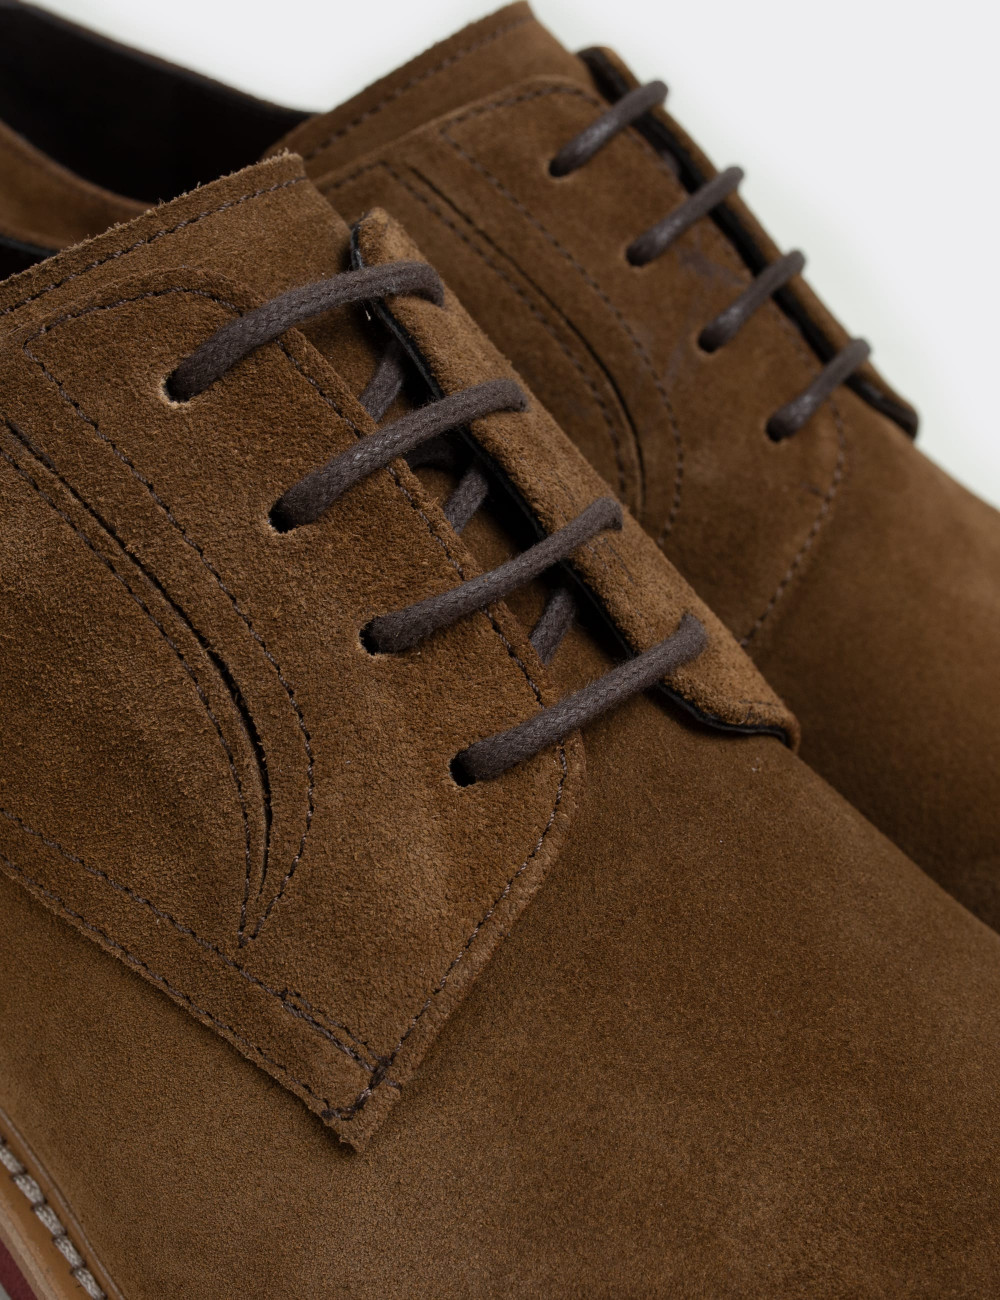 Tan Suede Leather Lace-up Shoes - 01294MTBAE08